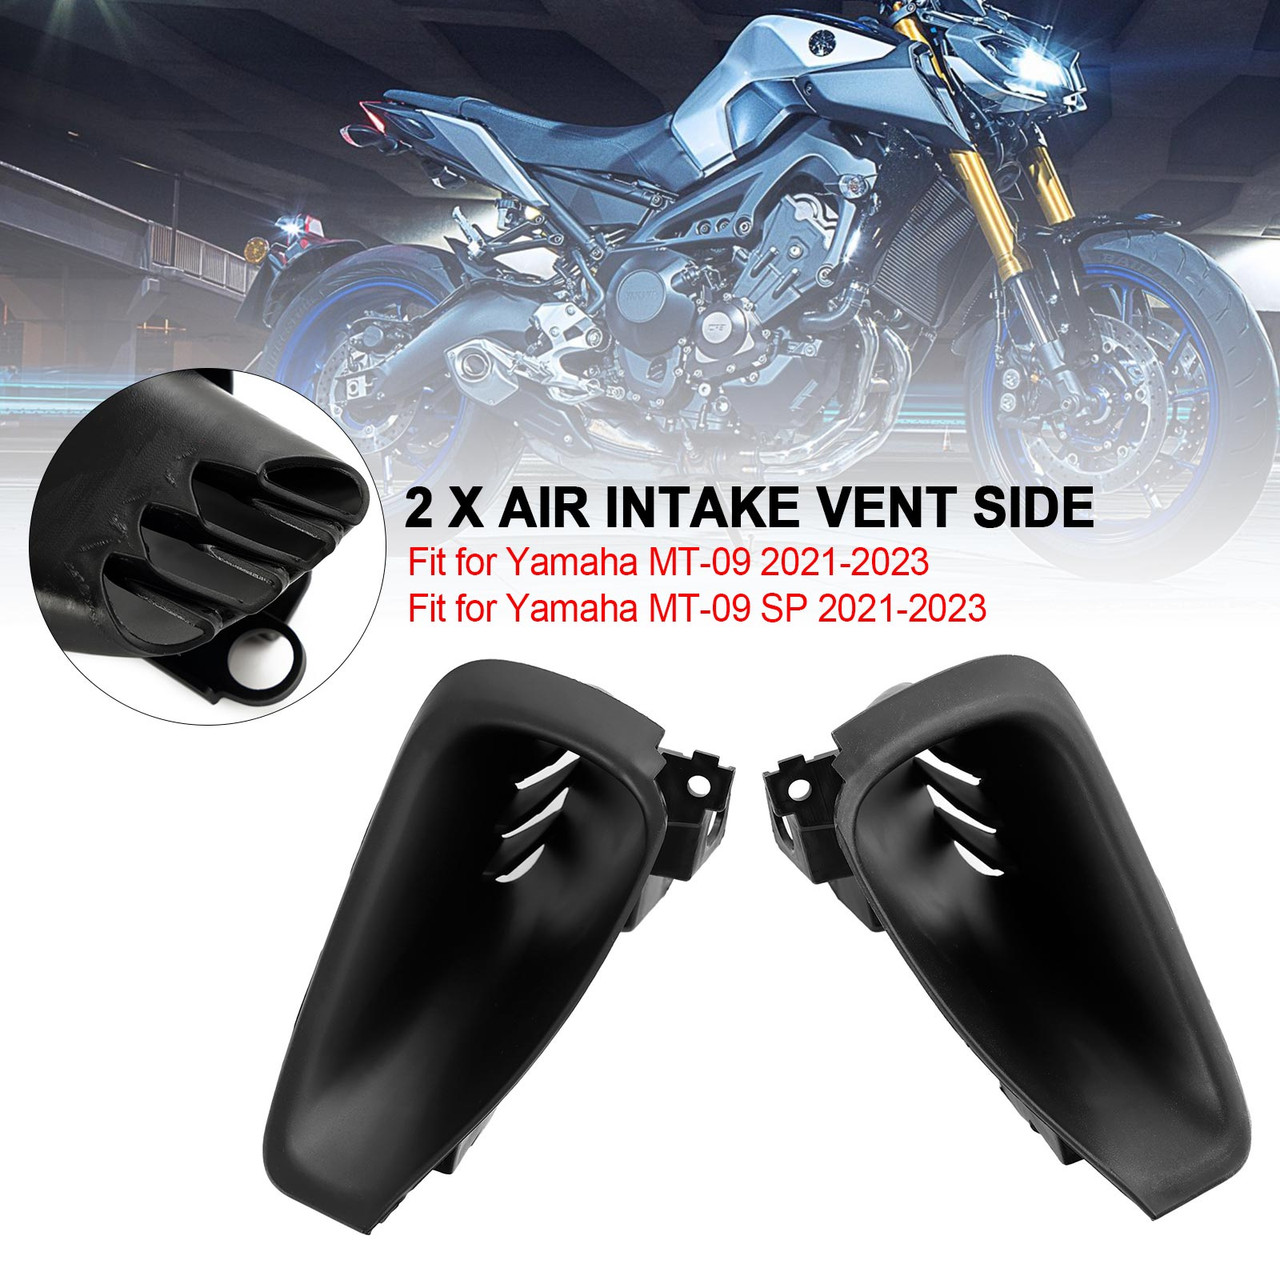 Unpainted Air Intake Vent side Fairing For Yamaha MT-09 / MT-09 SP 2021-2023